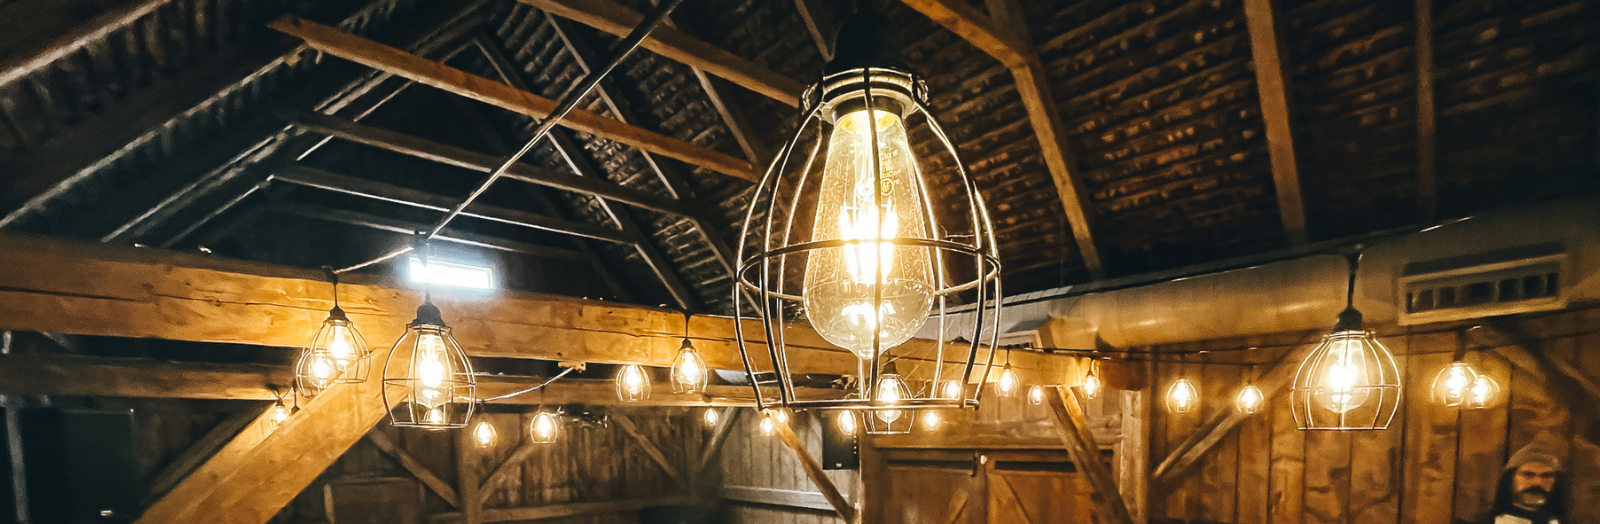 Lights in the Doiron House barn